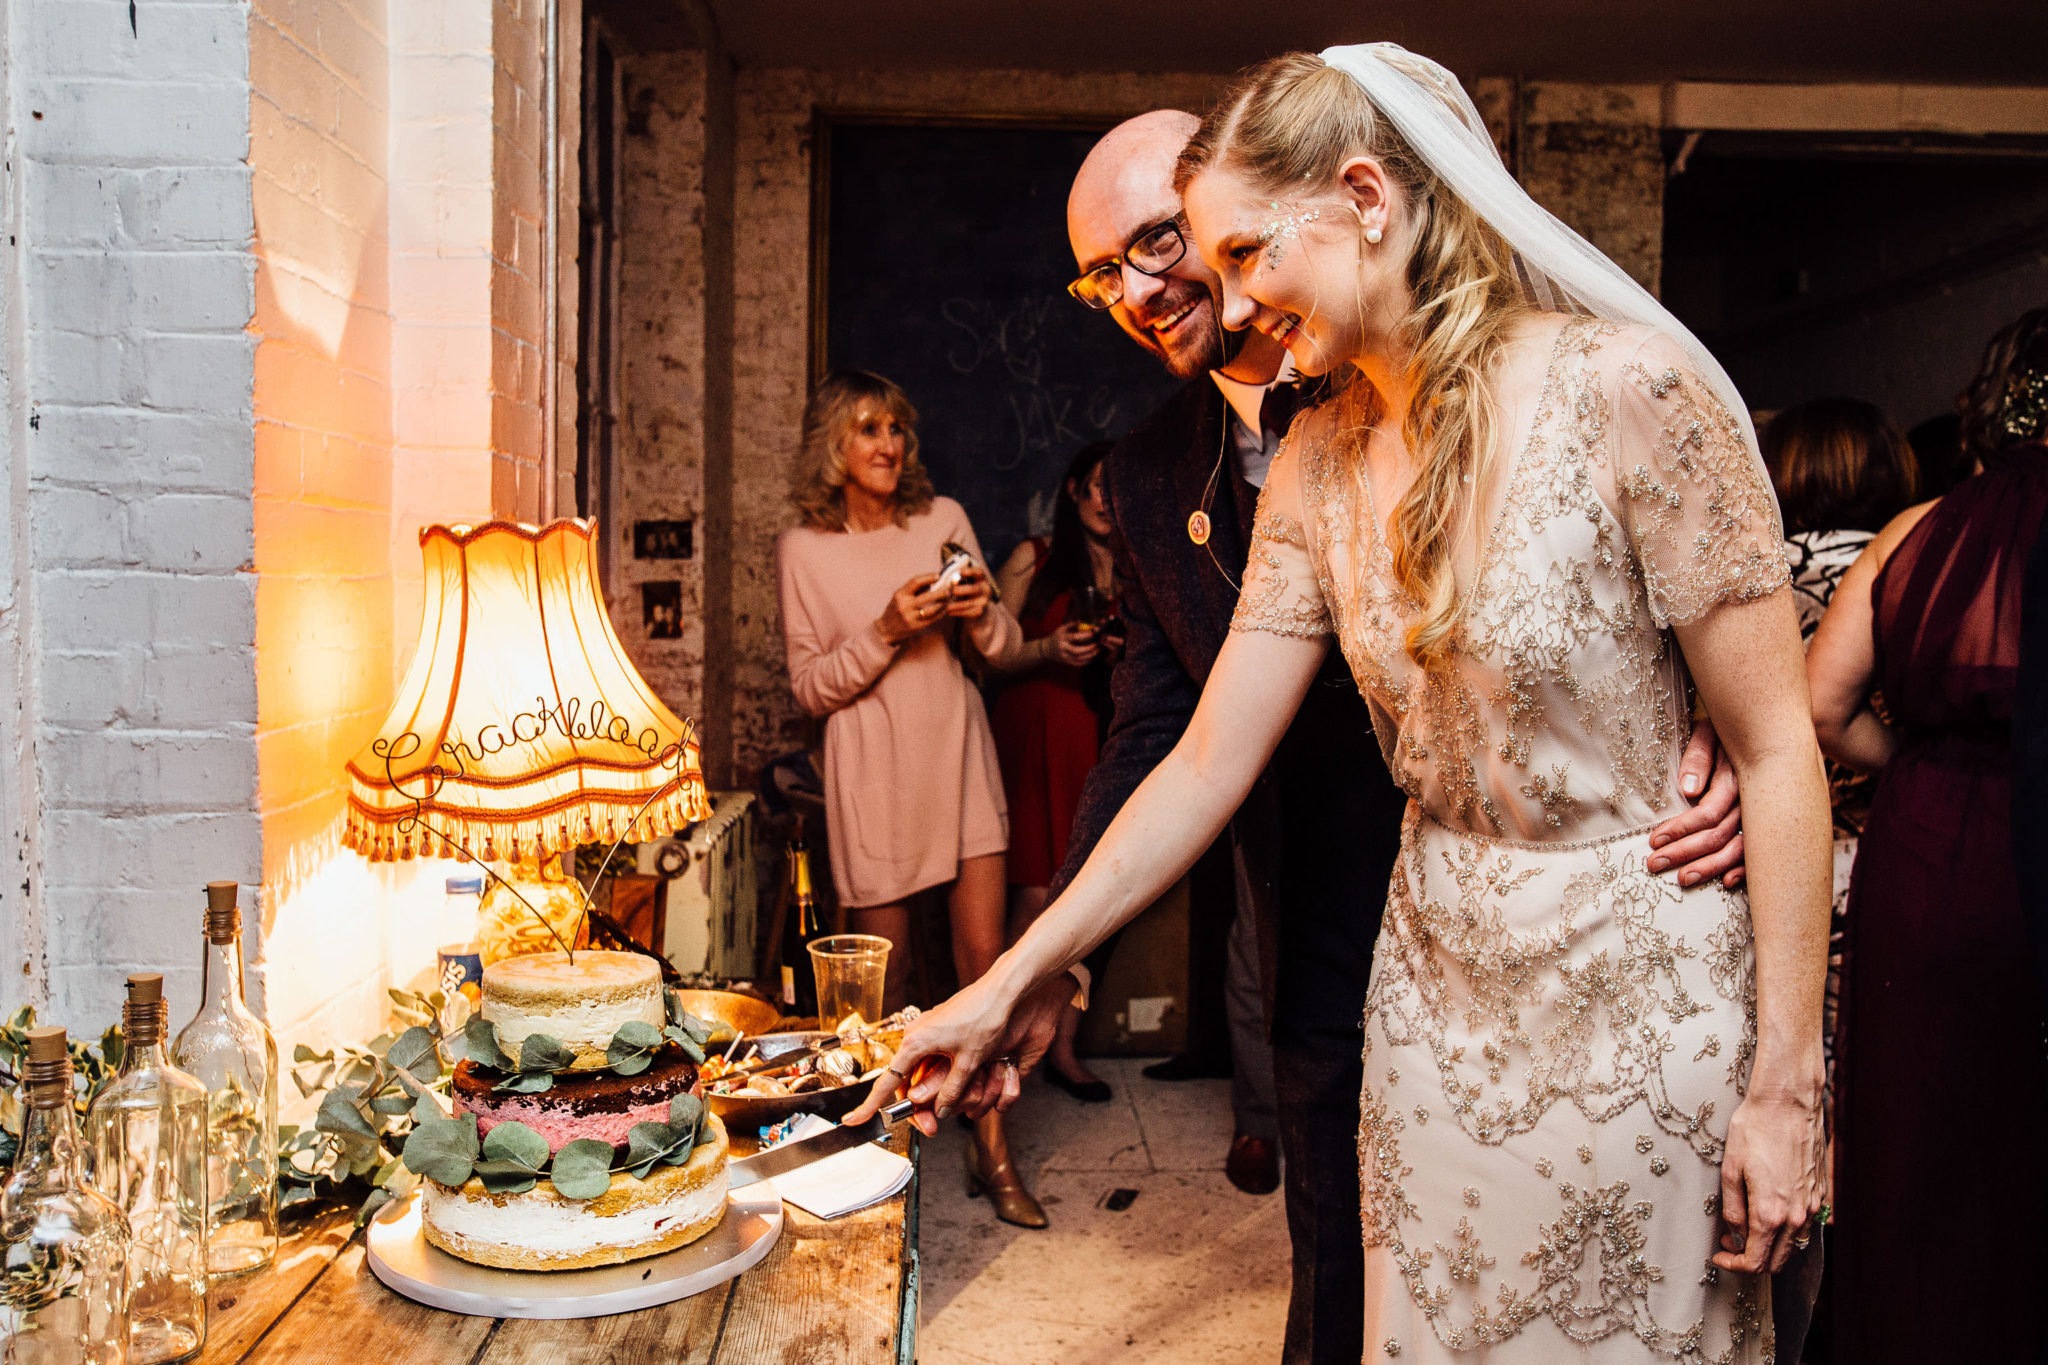 CANDIDS AT WAREHOUSE WEDDING AT ONE FRIENDLY PLACE LONDON DOCUMENTARY FUN WEDDING PHOTOGRAPHY